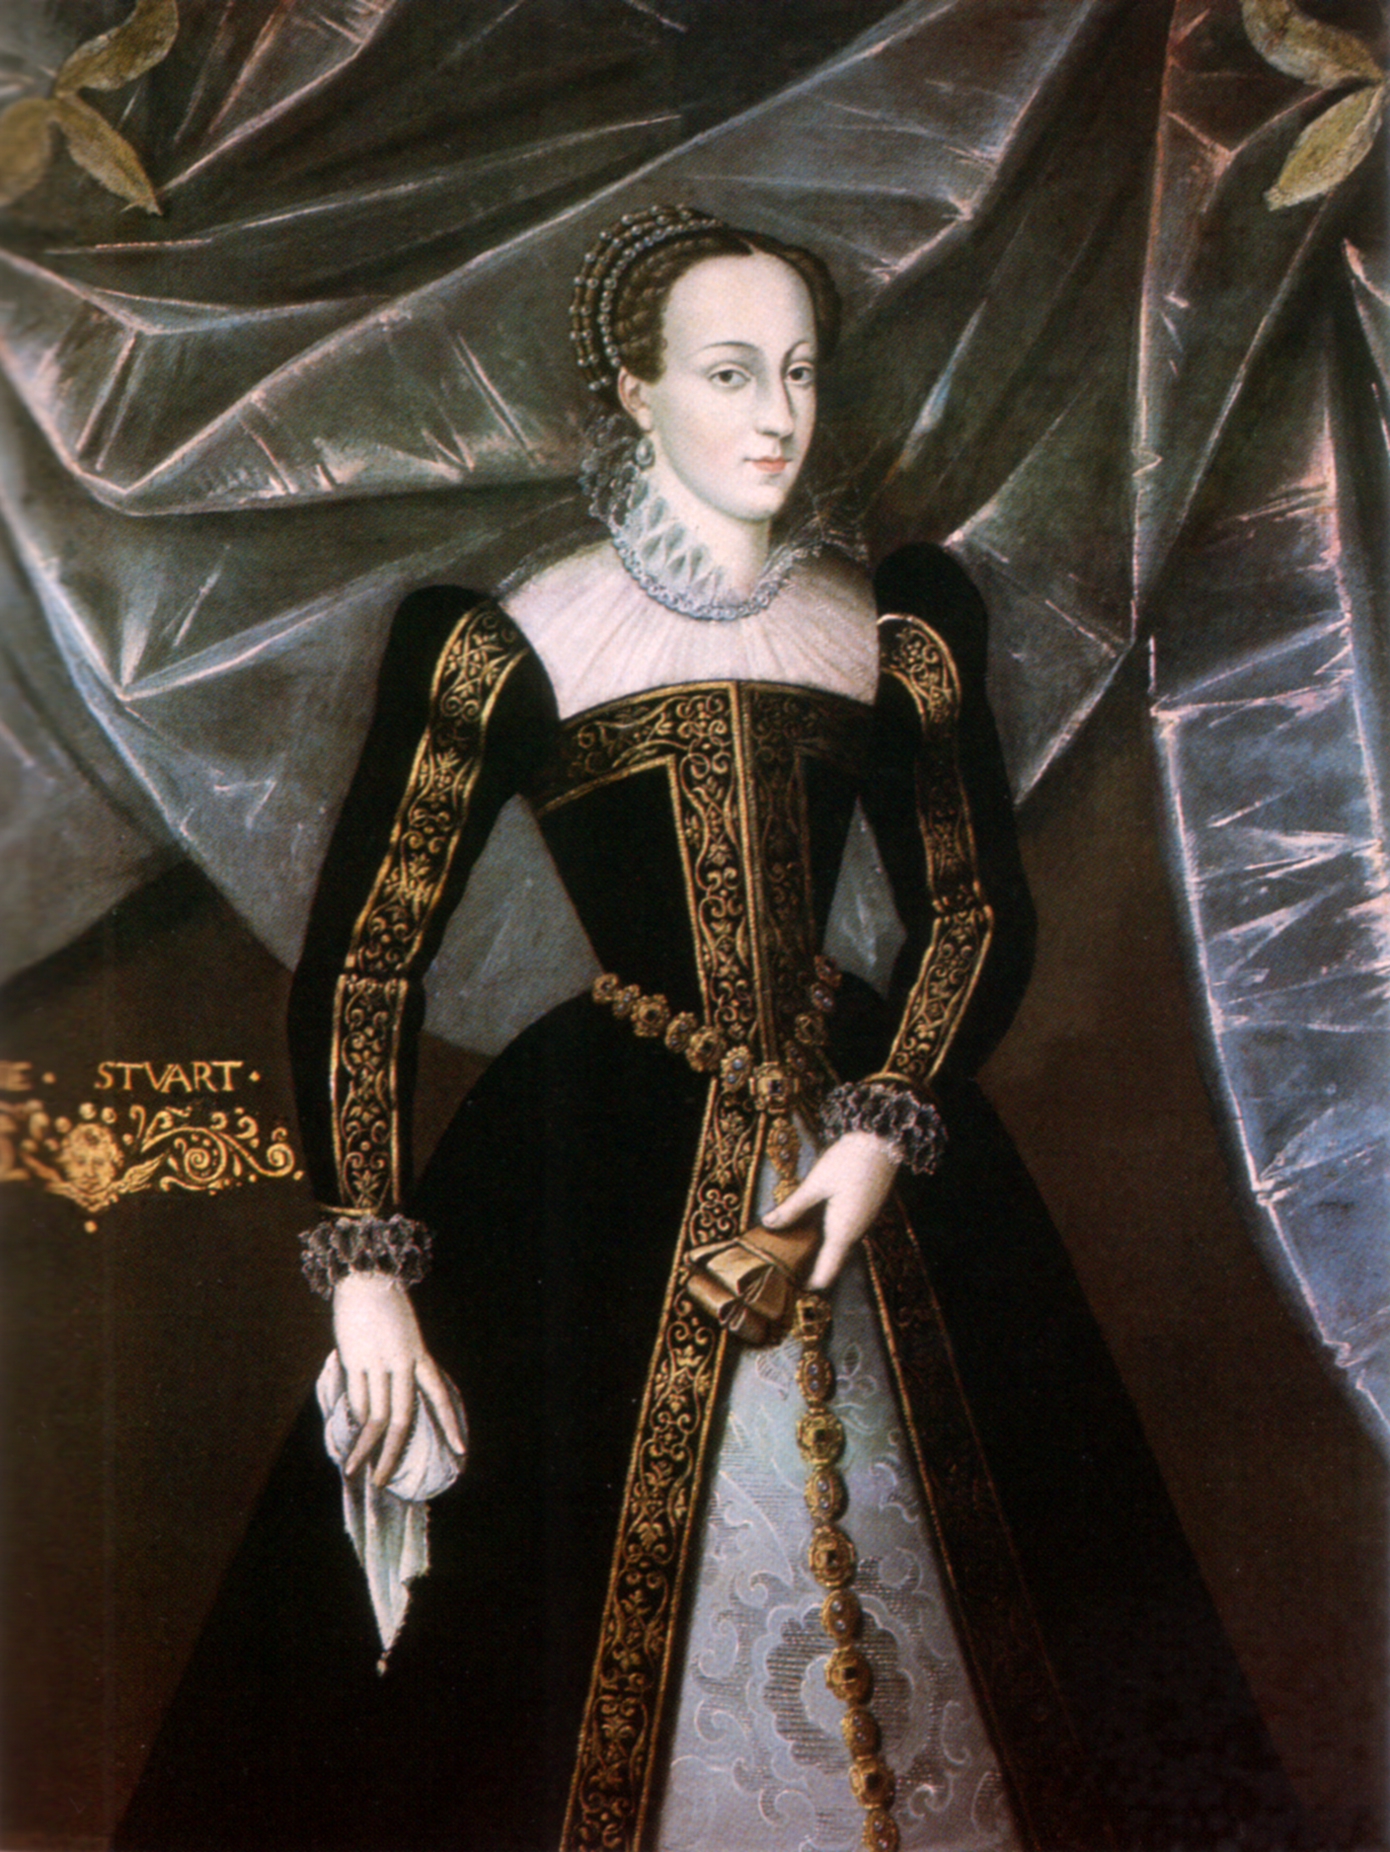 /800/600/https/upload.wikimedia.org/wikipedia/commons/1/1c/Mary_Queen_of_Scots_Blairs_Museum.jpg